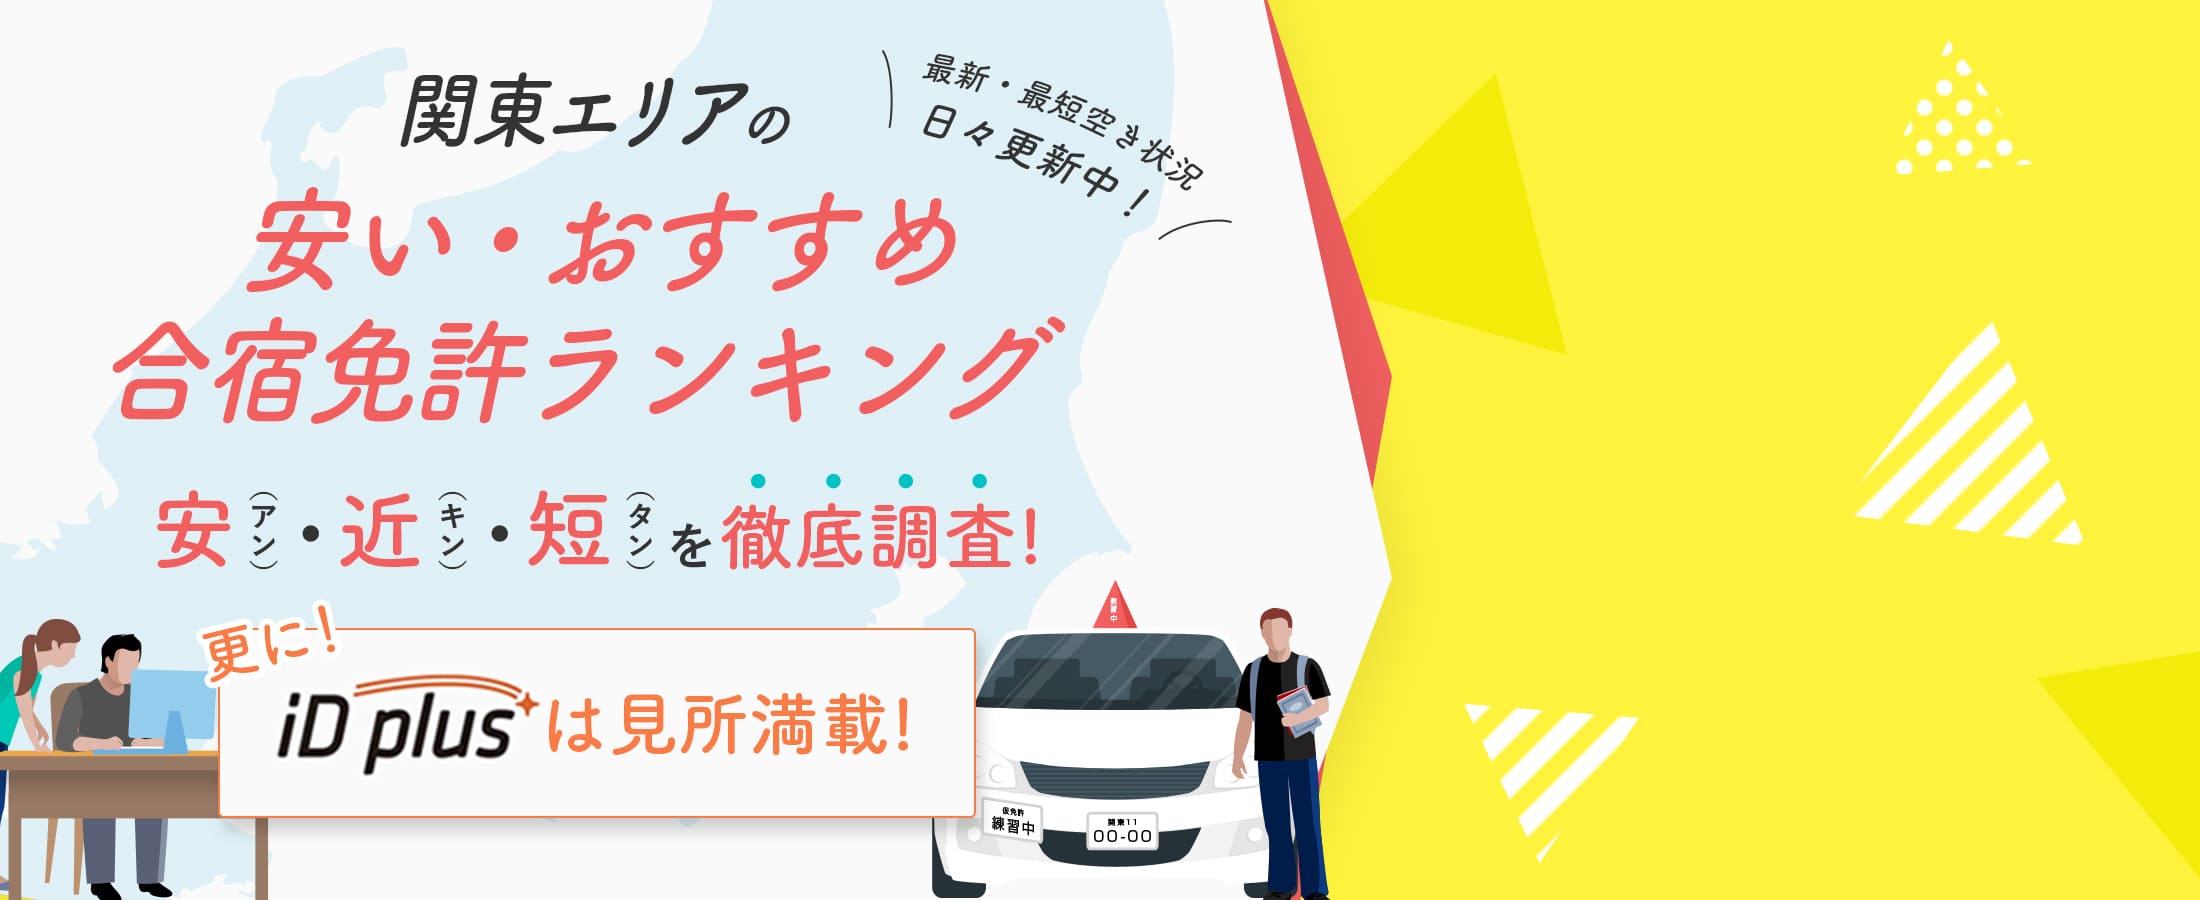 Thorough investigation of cheap recommended Driving Camp rankings in the Kanto Area: cheap (Ann), near (Kin), short (Tan)! Furthermore, ID Plus is full of highlights!